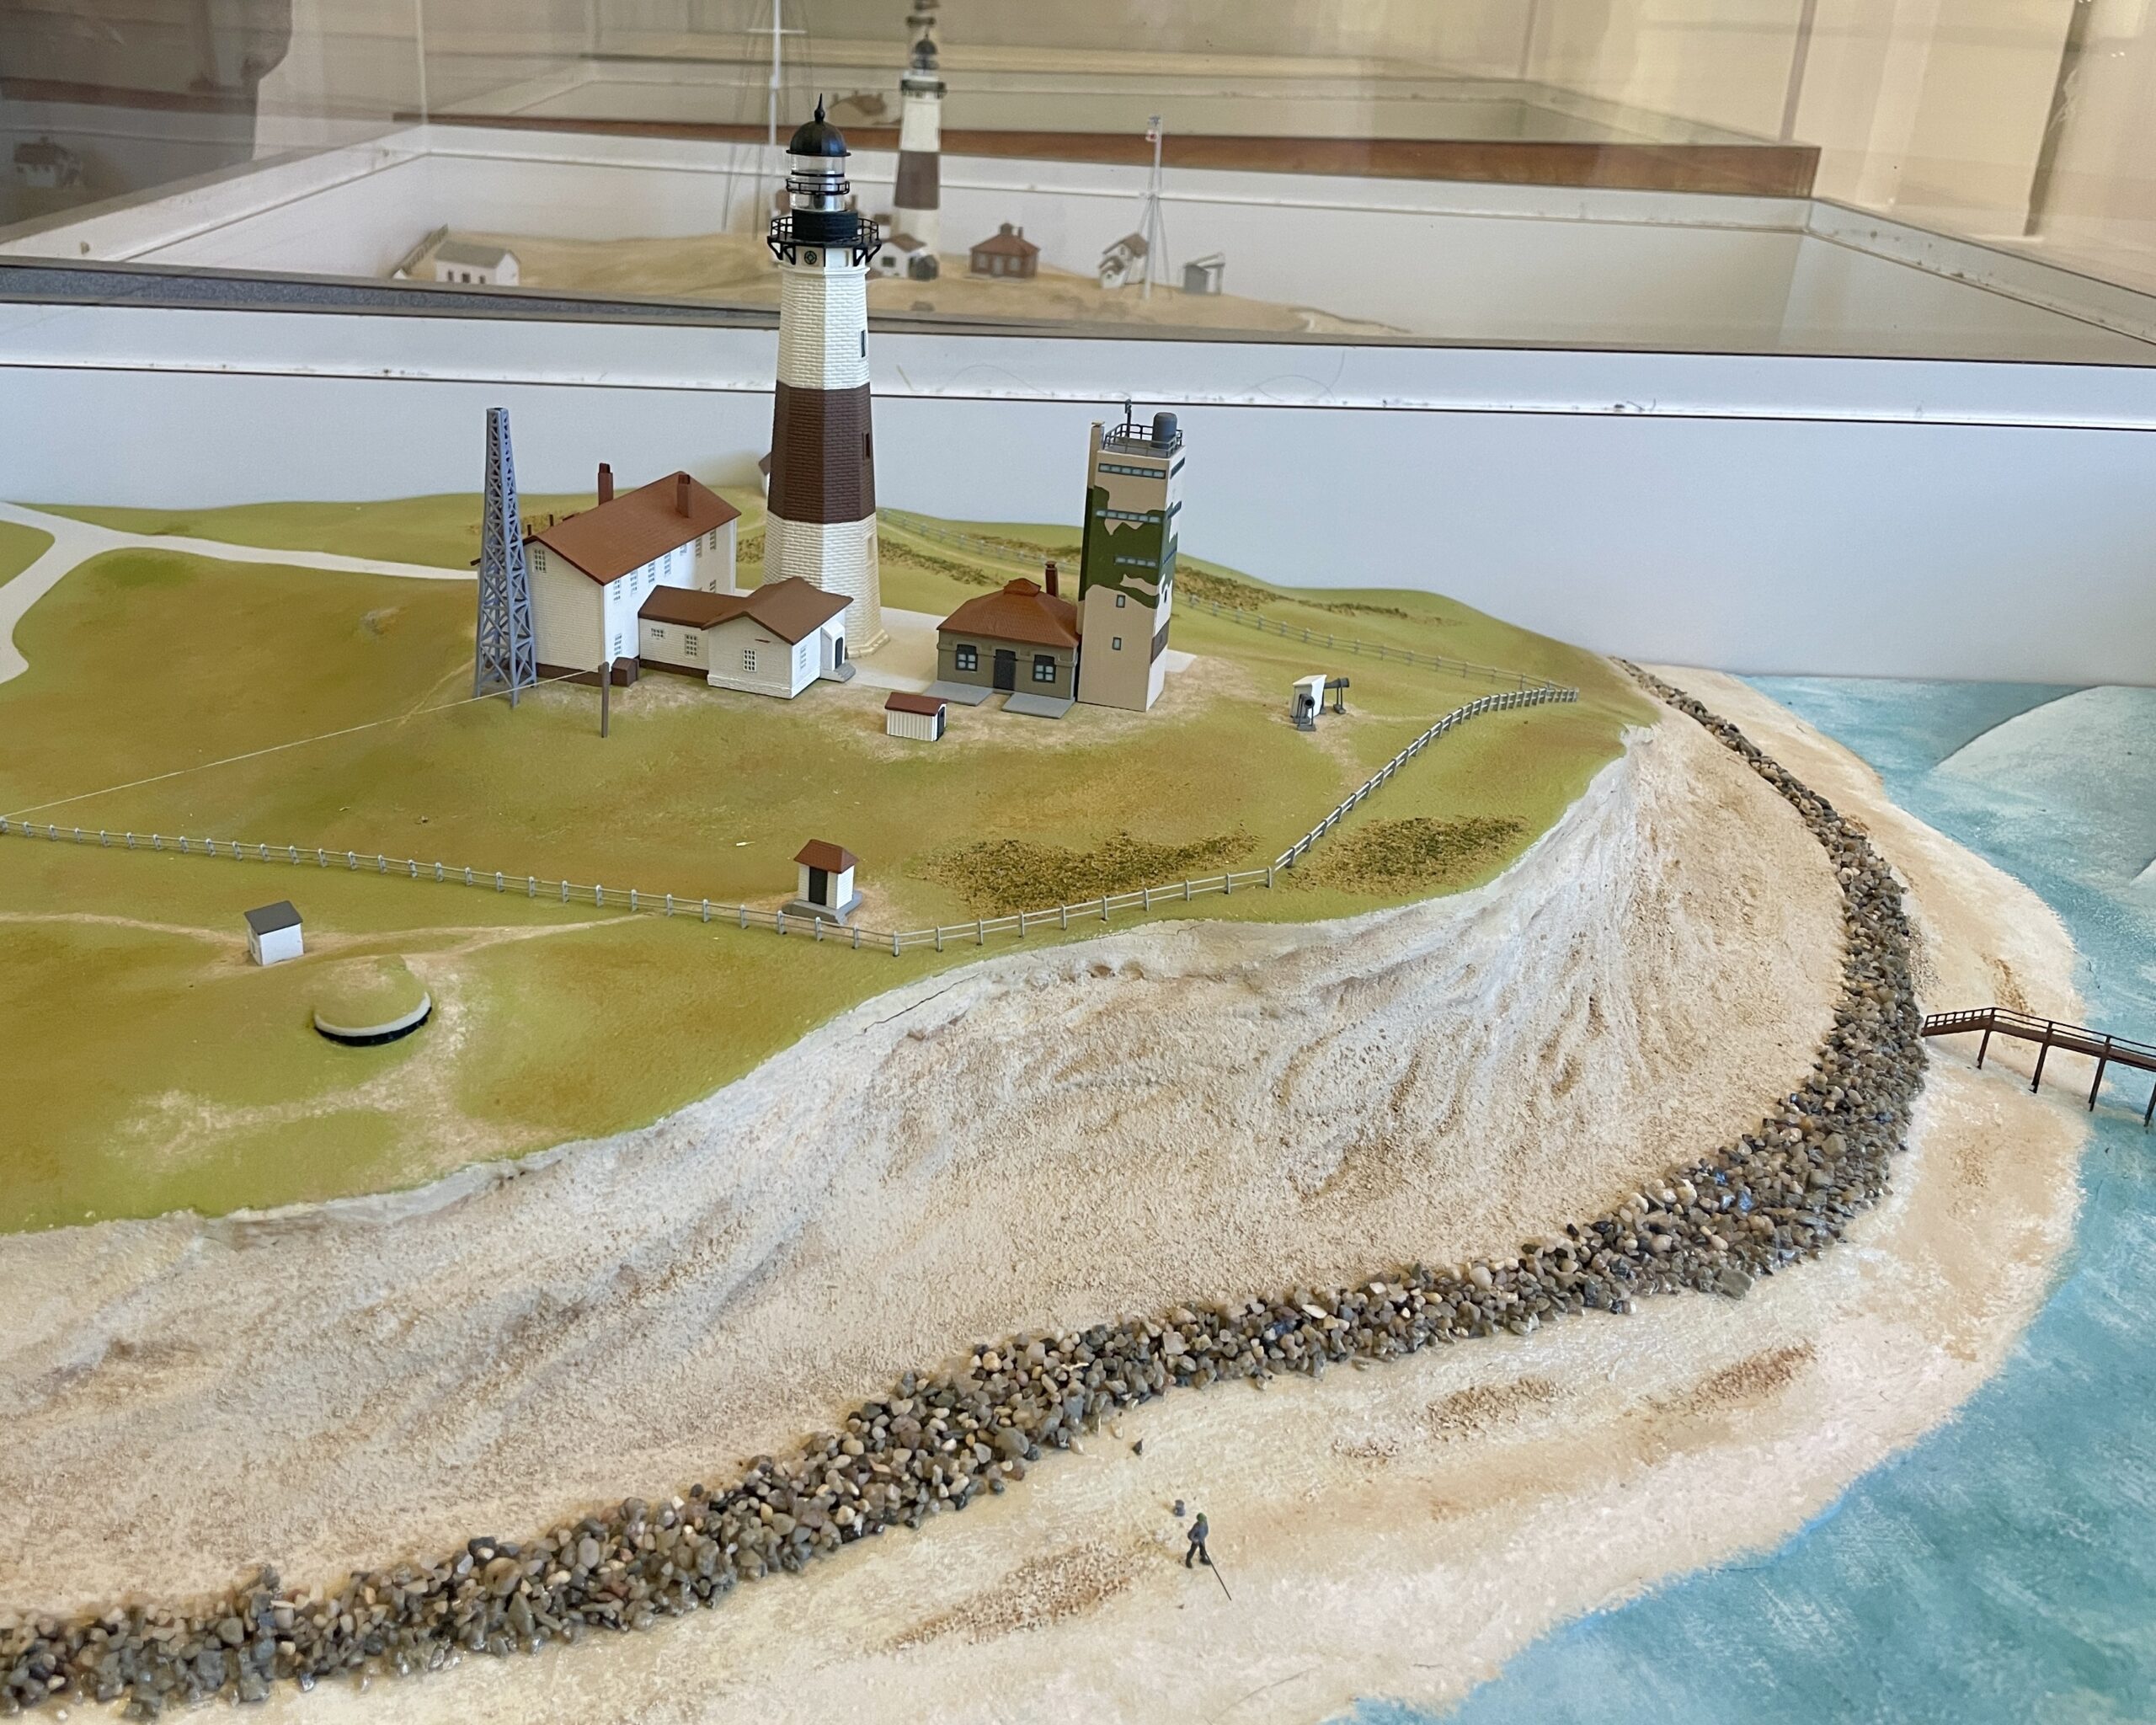 A model of the lighthouse property in the post-WWII days shows the pillbox when it was buried in the bluff along the lighthouse property's southern edge. Built in 1943, by 1976, erosion had exposed the pillbox and its foundation.